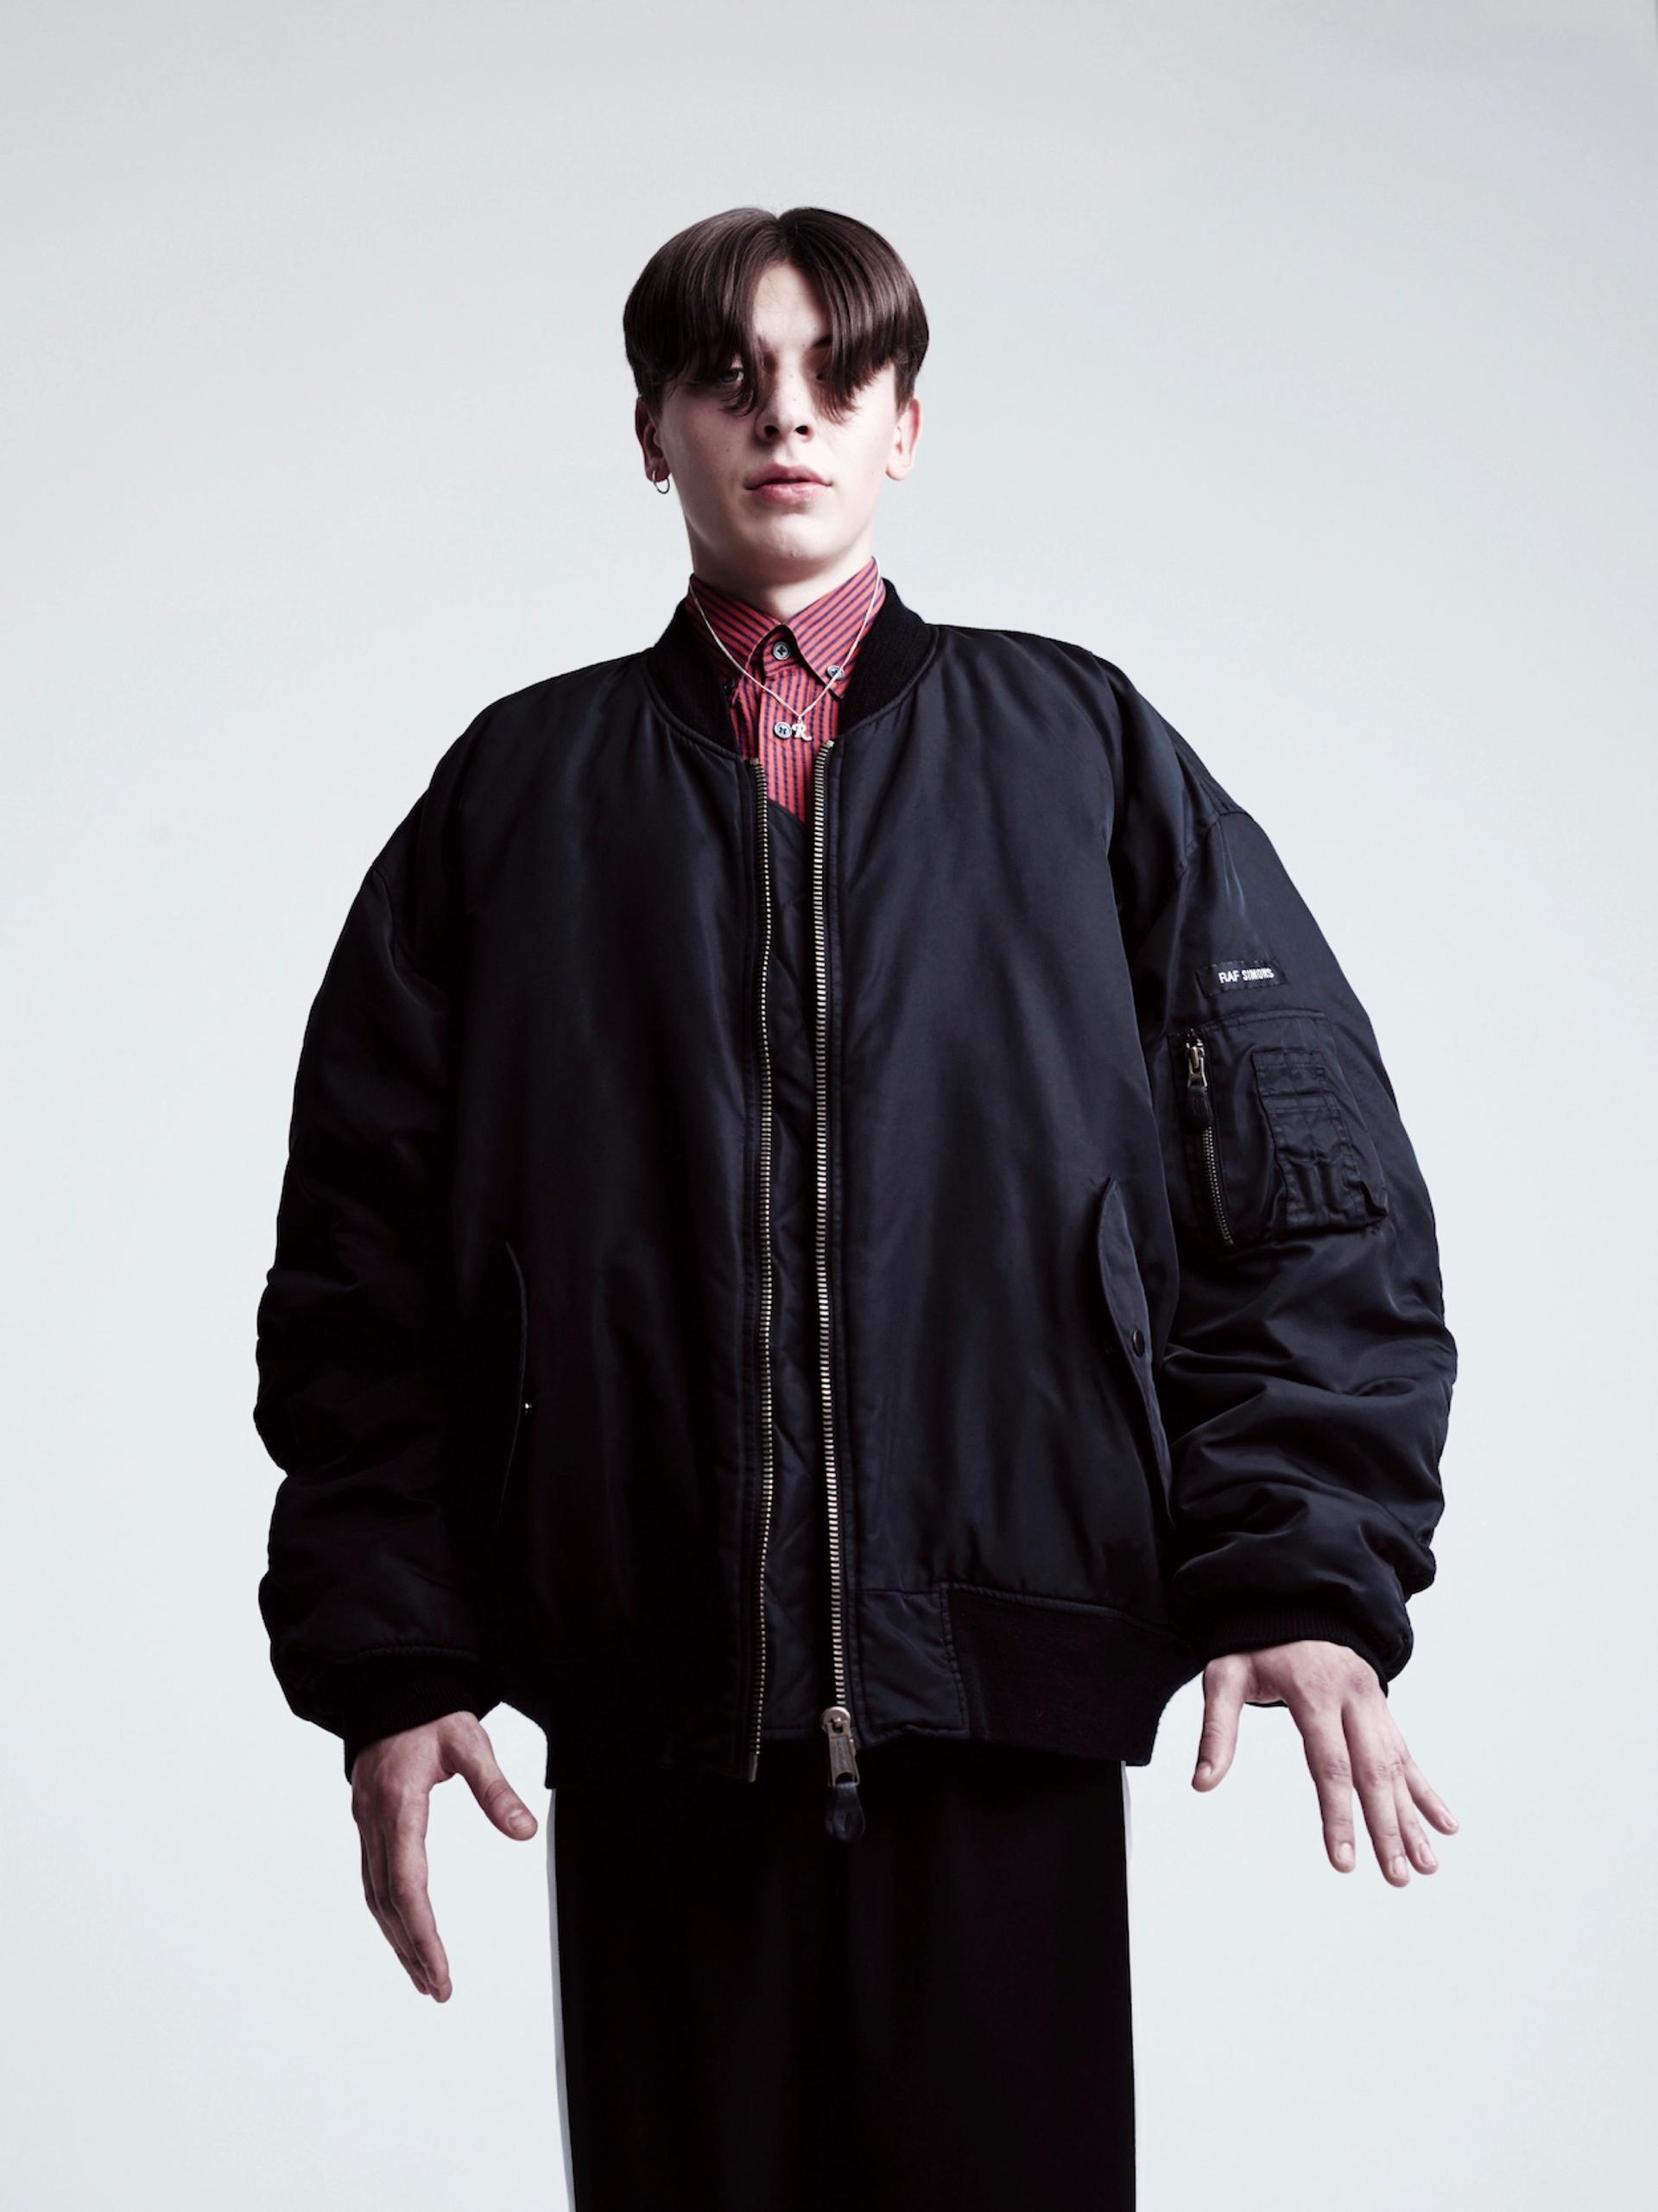 LANDER: nylon bomber jacket, cotton shirt, polyester track pants with inserts: RAF SIMONS S/S 2000; silver necklace with silver 'R-initial' pendant and silver earring: RAF SIMONS A/W 2003/2004